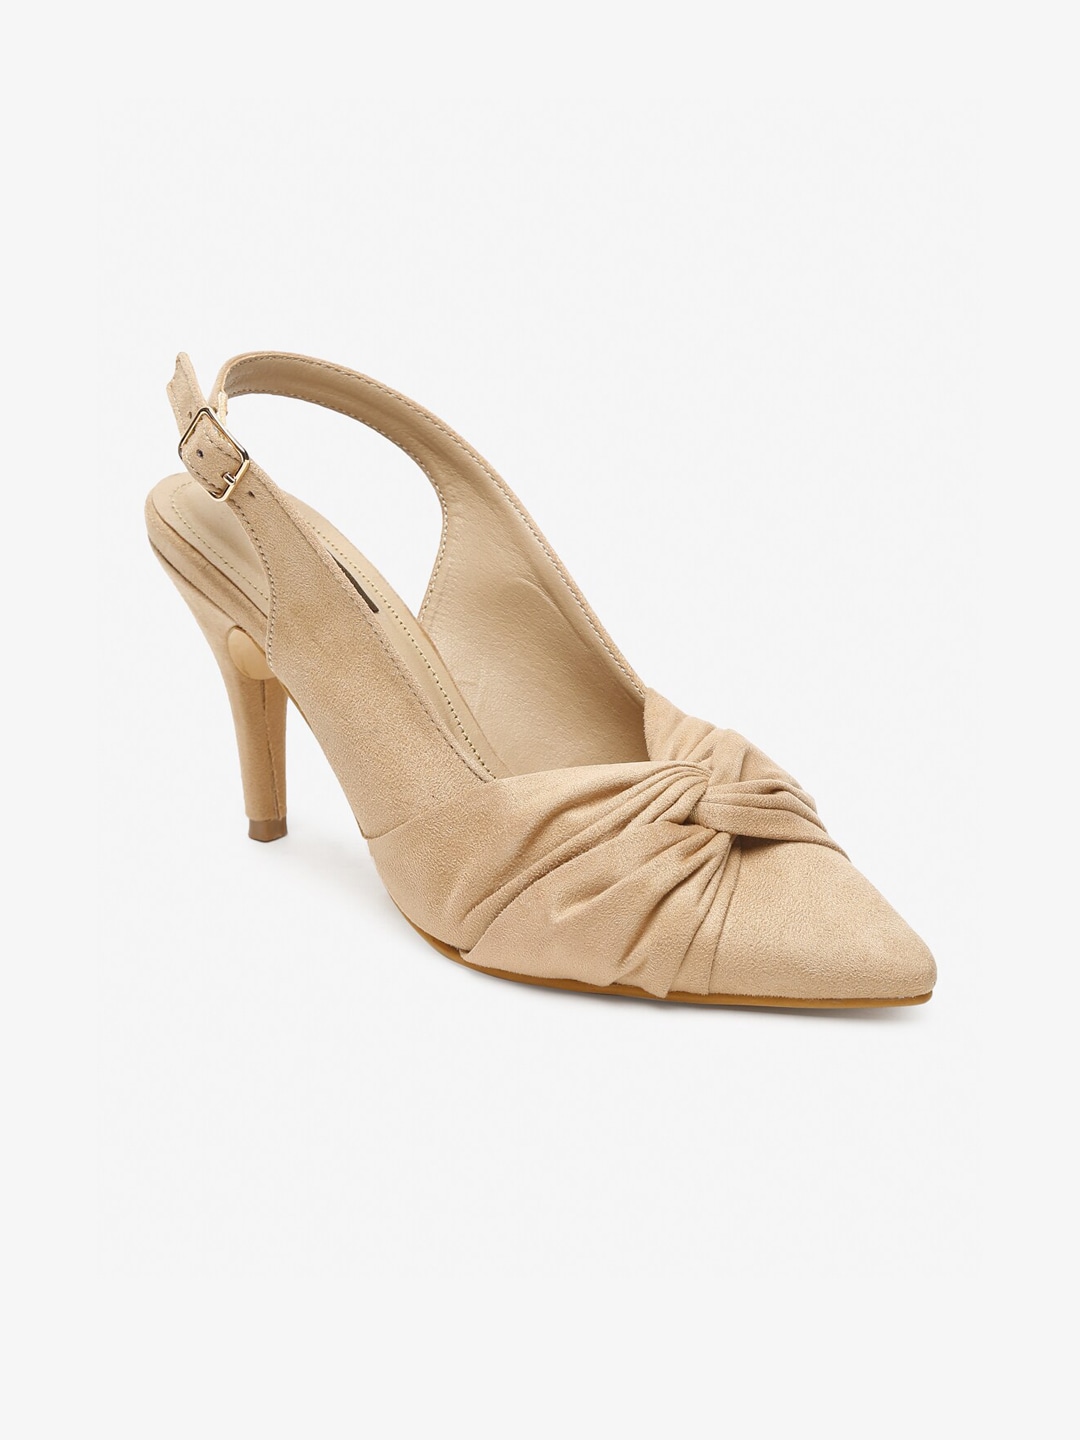 Flat n Heels Khaki Suede Stiletto Pumps with Buckles Price in India